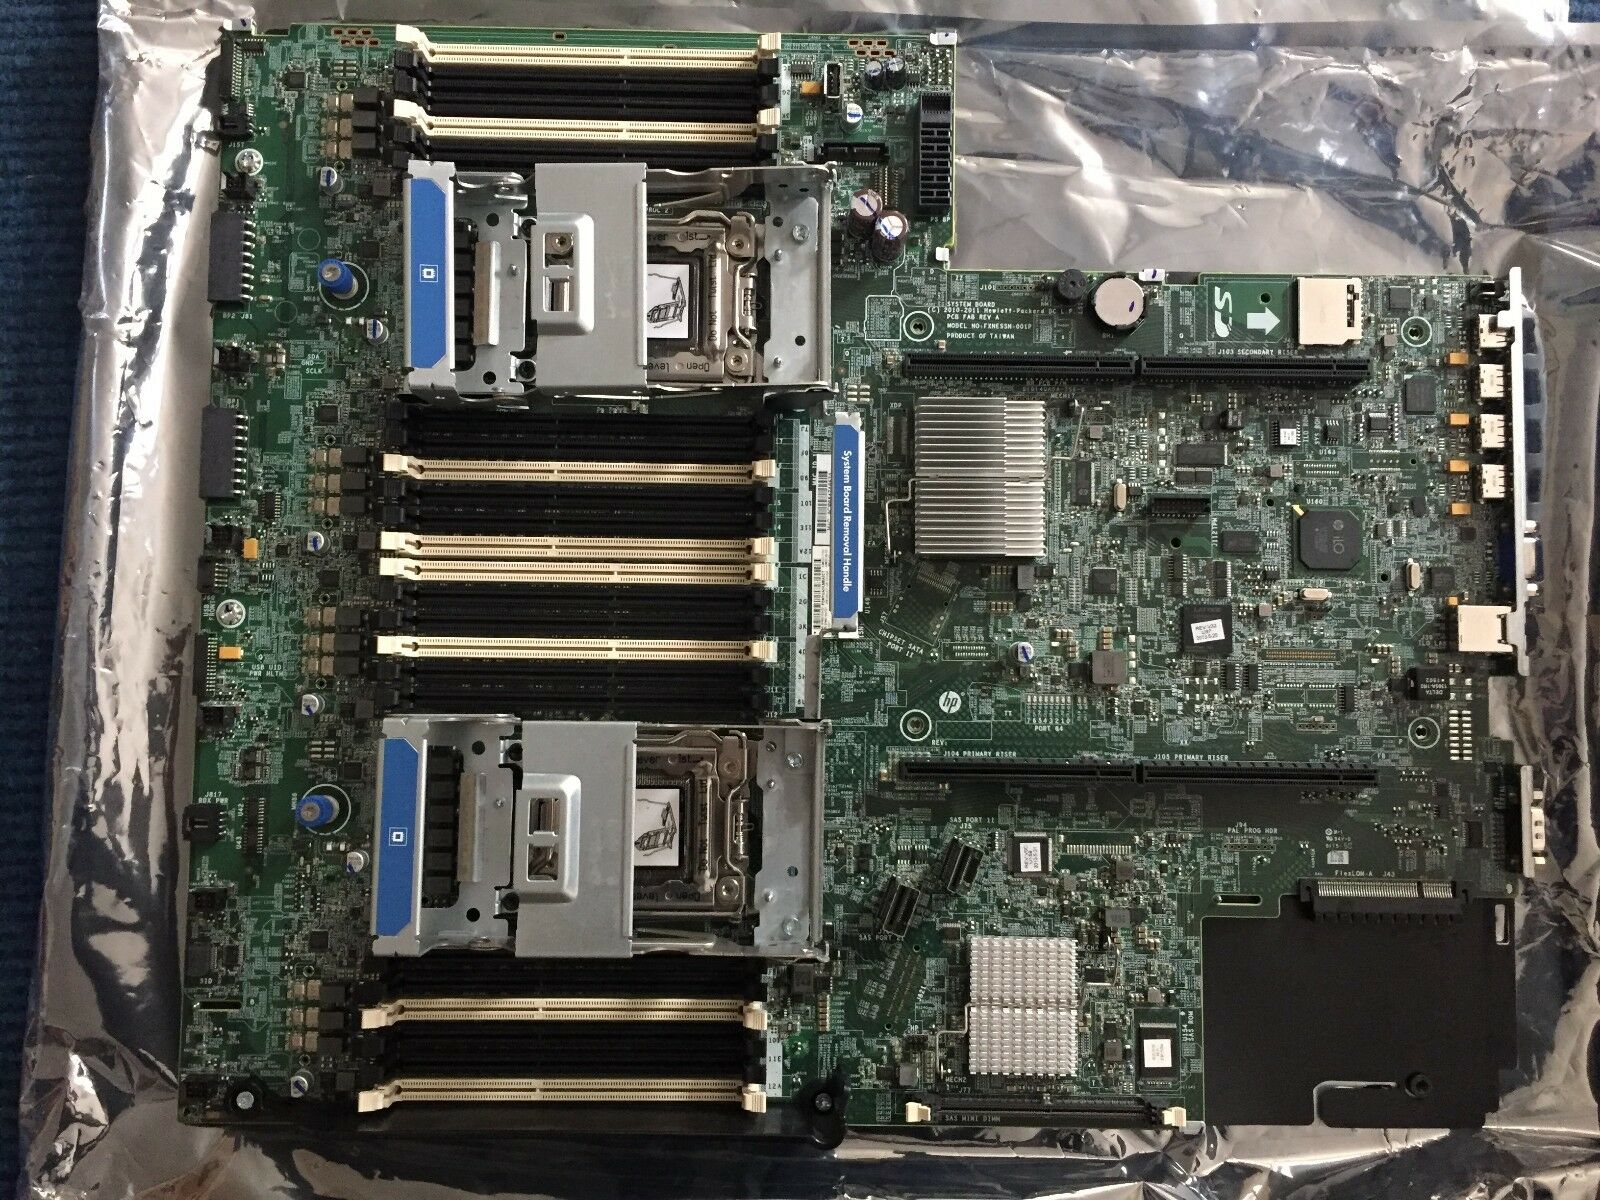 801939-001 FULLY Tested Hewlett Packard ProLiant DL380p G8 Motherboard 801939-001 Brand: HP MPN: 801939-00 - Click Image to Close